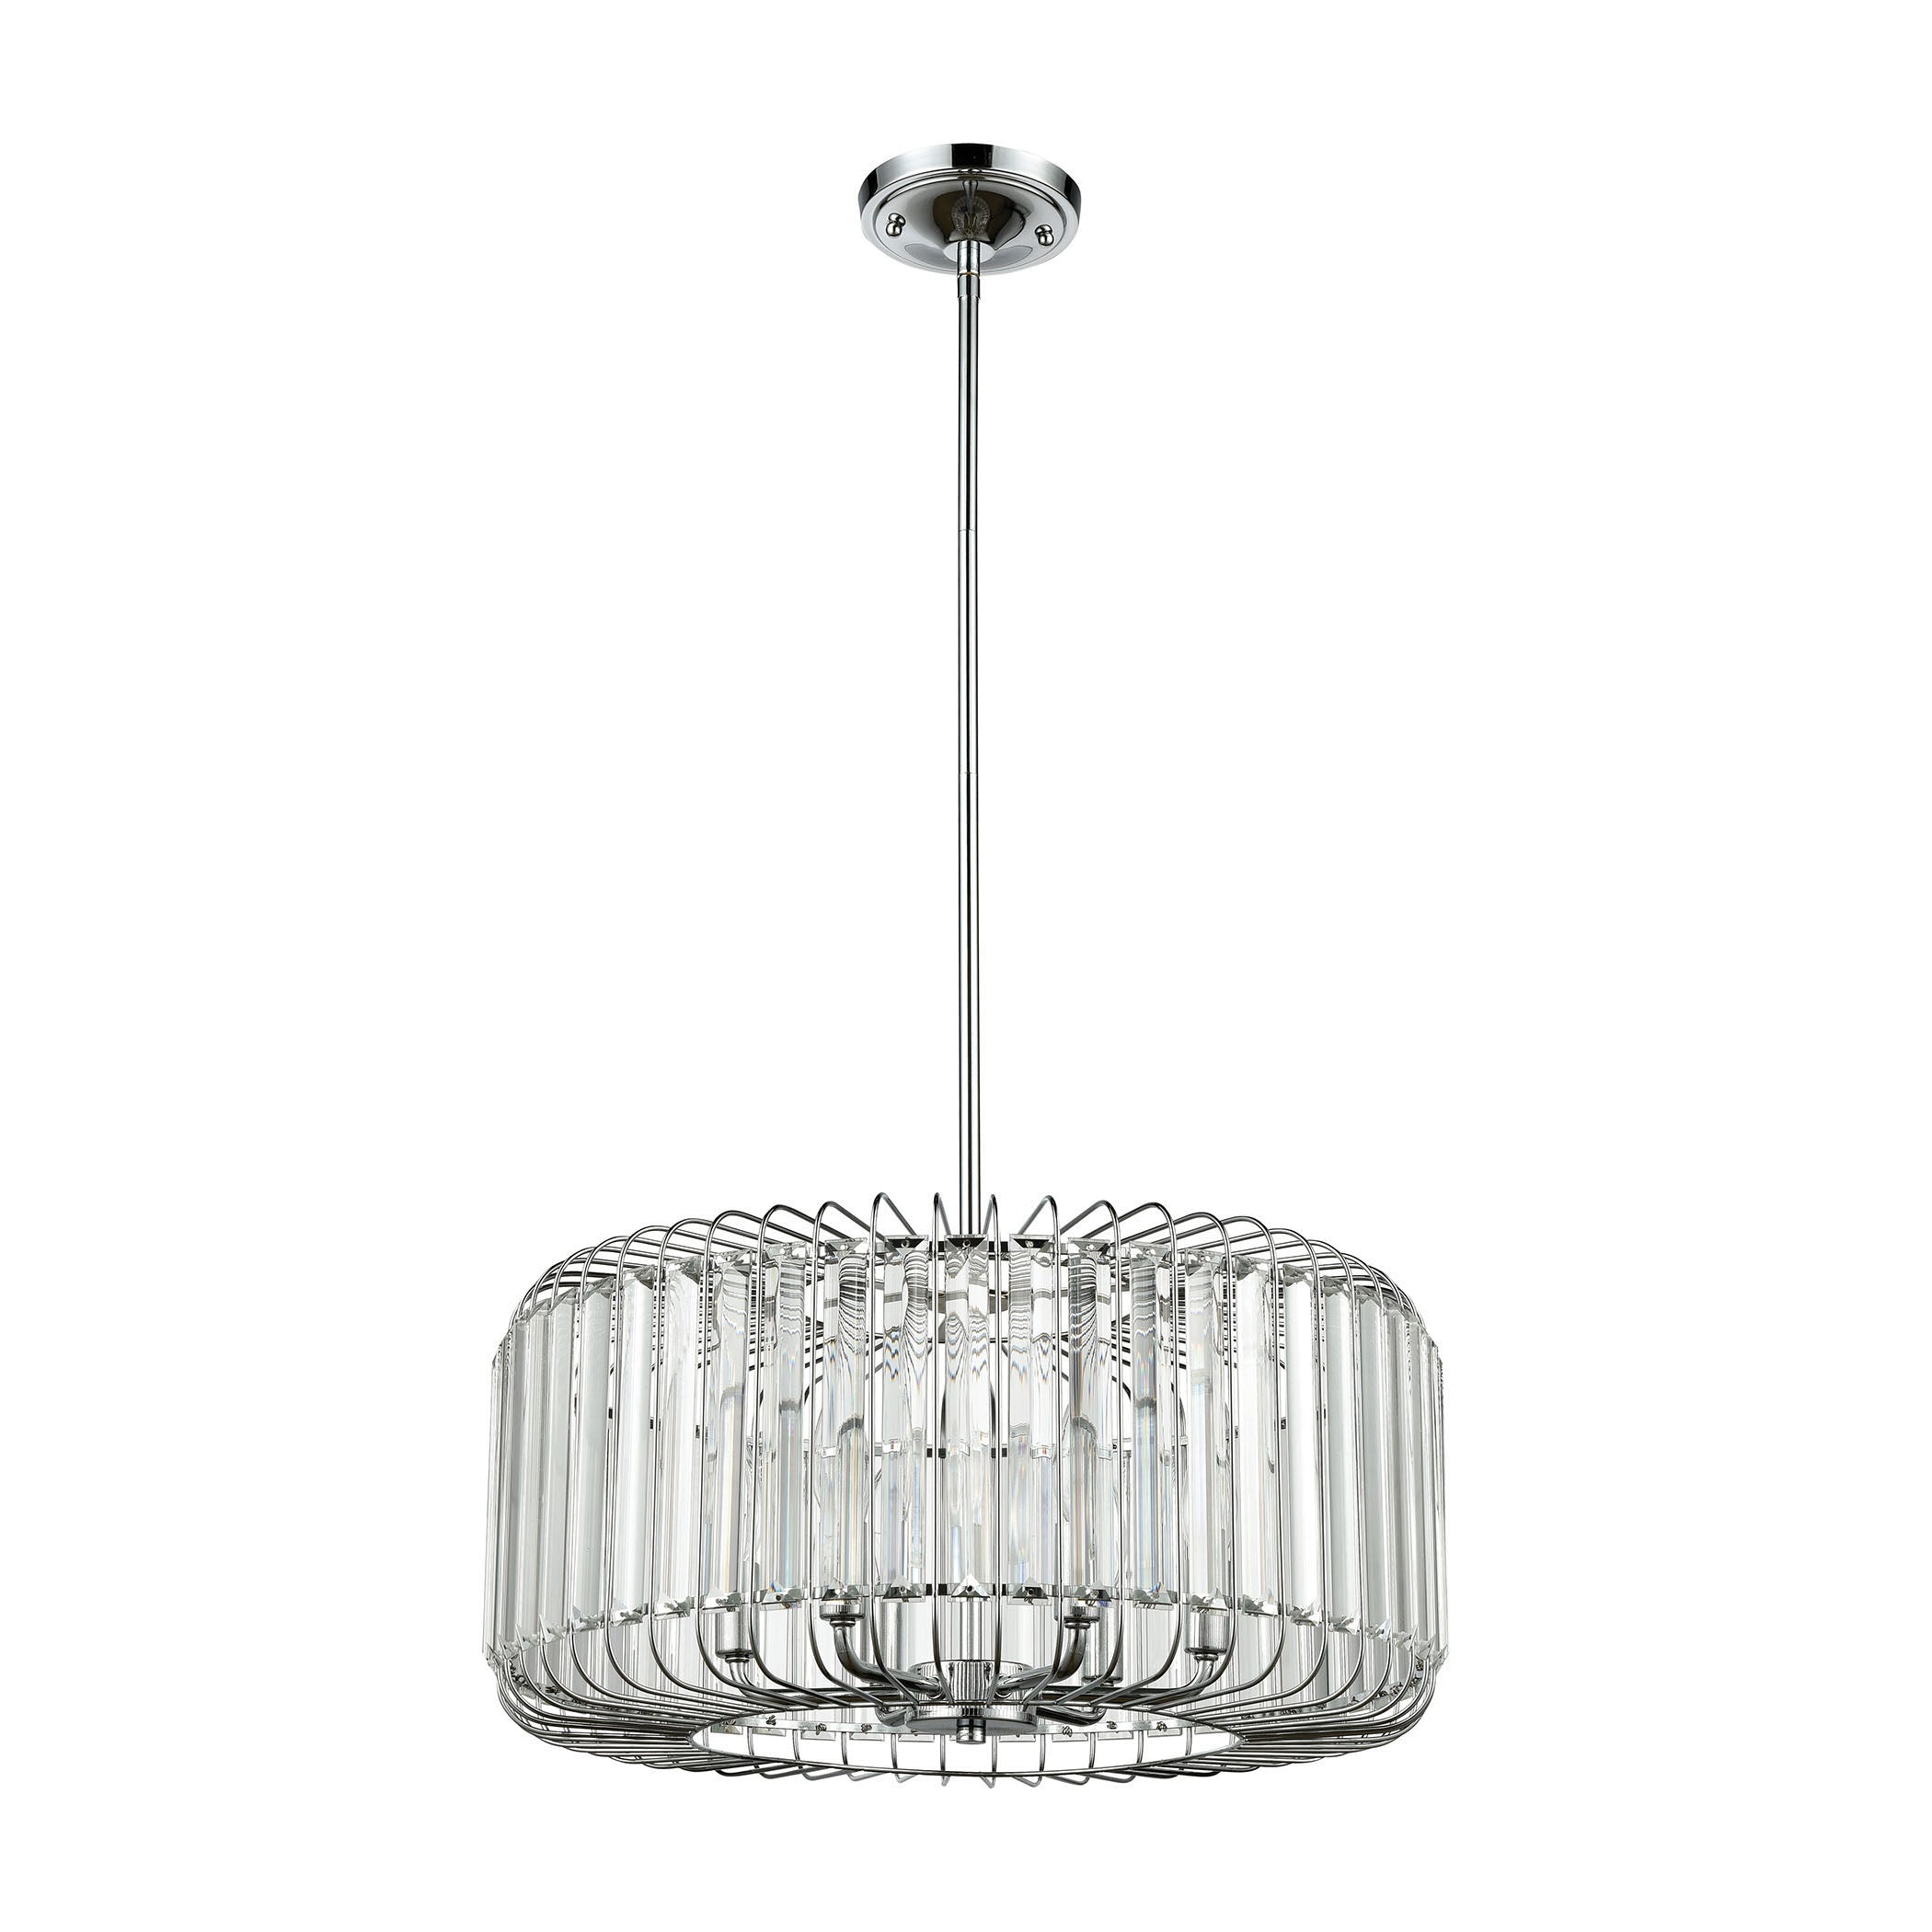 ELK Lighting 81325/6 Beaumont 6-Light Chandelier in Polished Chrome with Clear Crystal